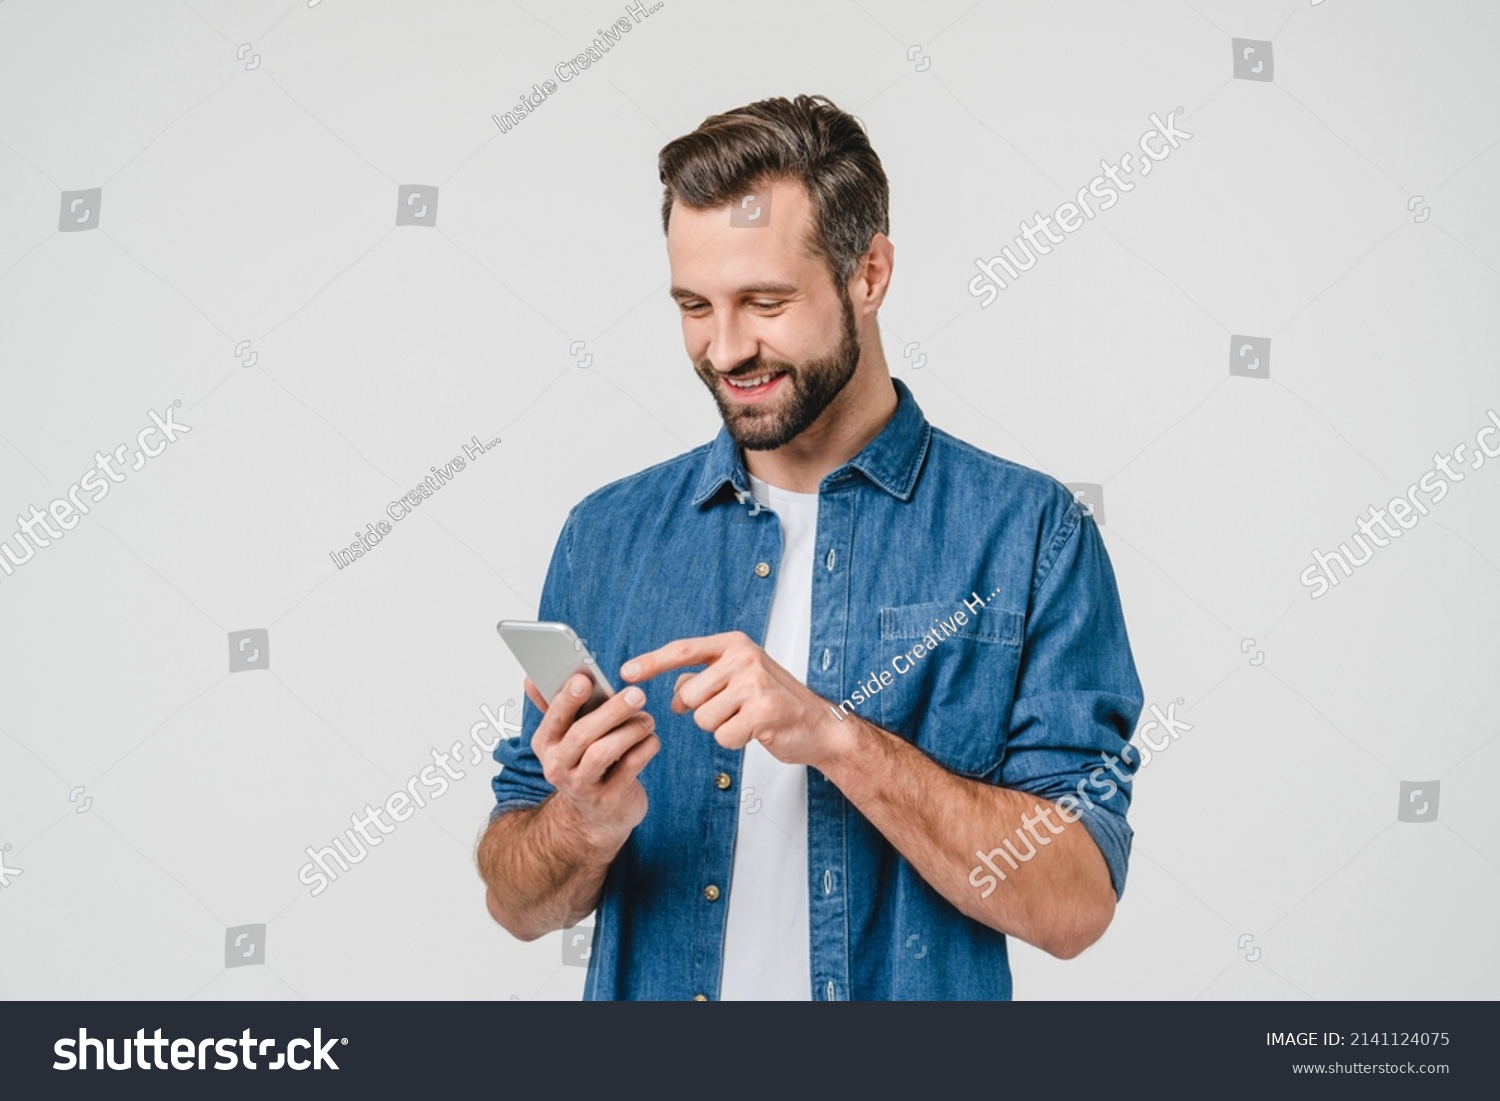 Happy caucasian young man using smart phone cellphone for calls, social media, mobile application online isolated in white background #2141124075